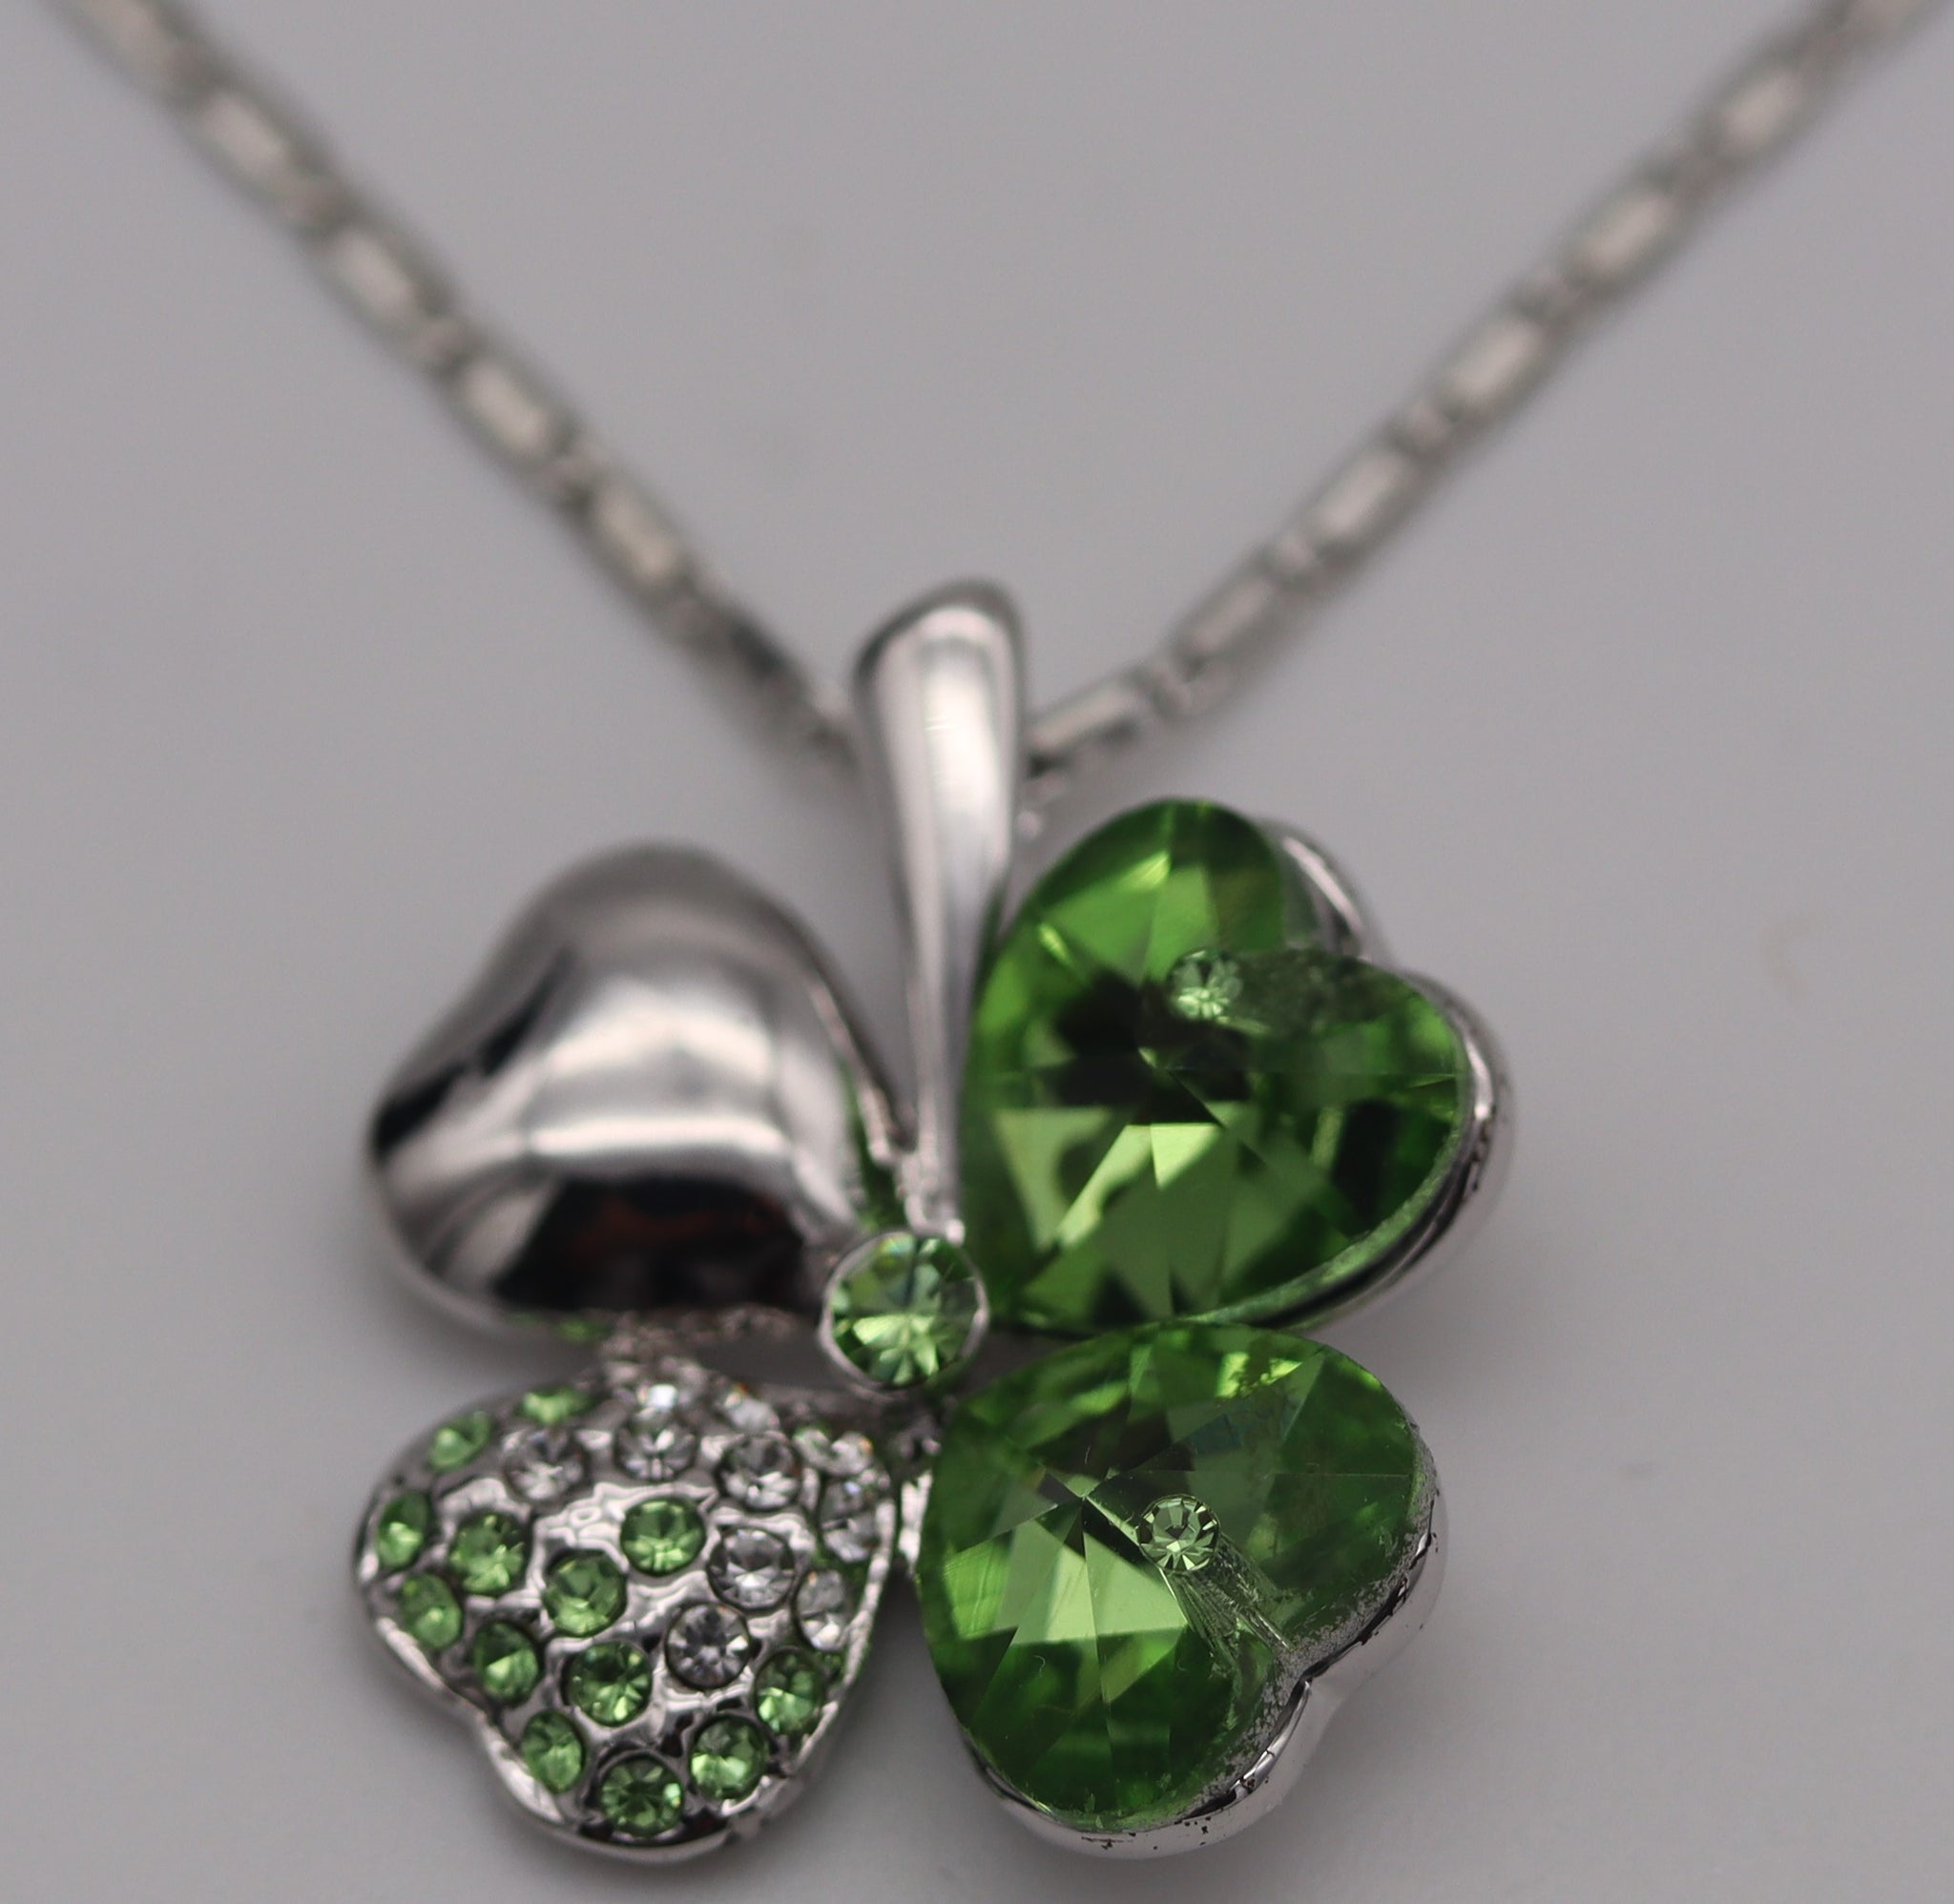 Four Leaf Clover Crystal Earrings and Necklace Set